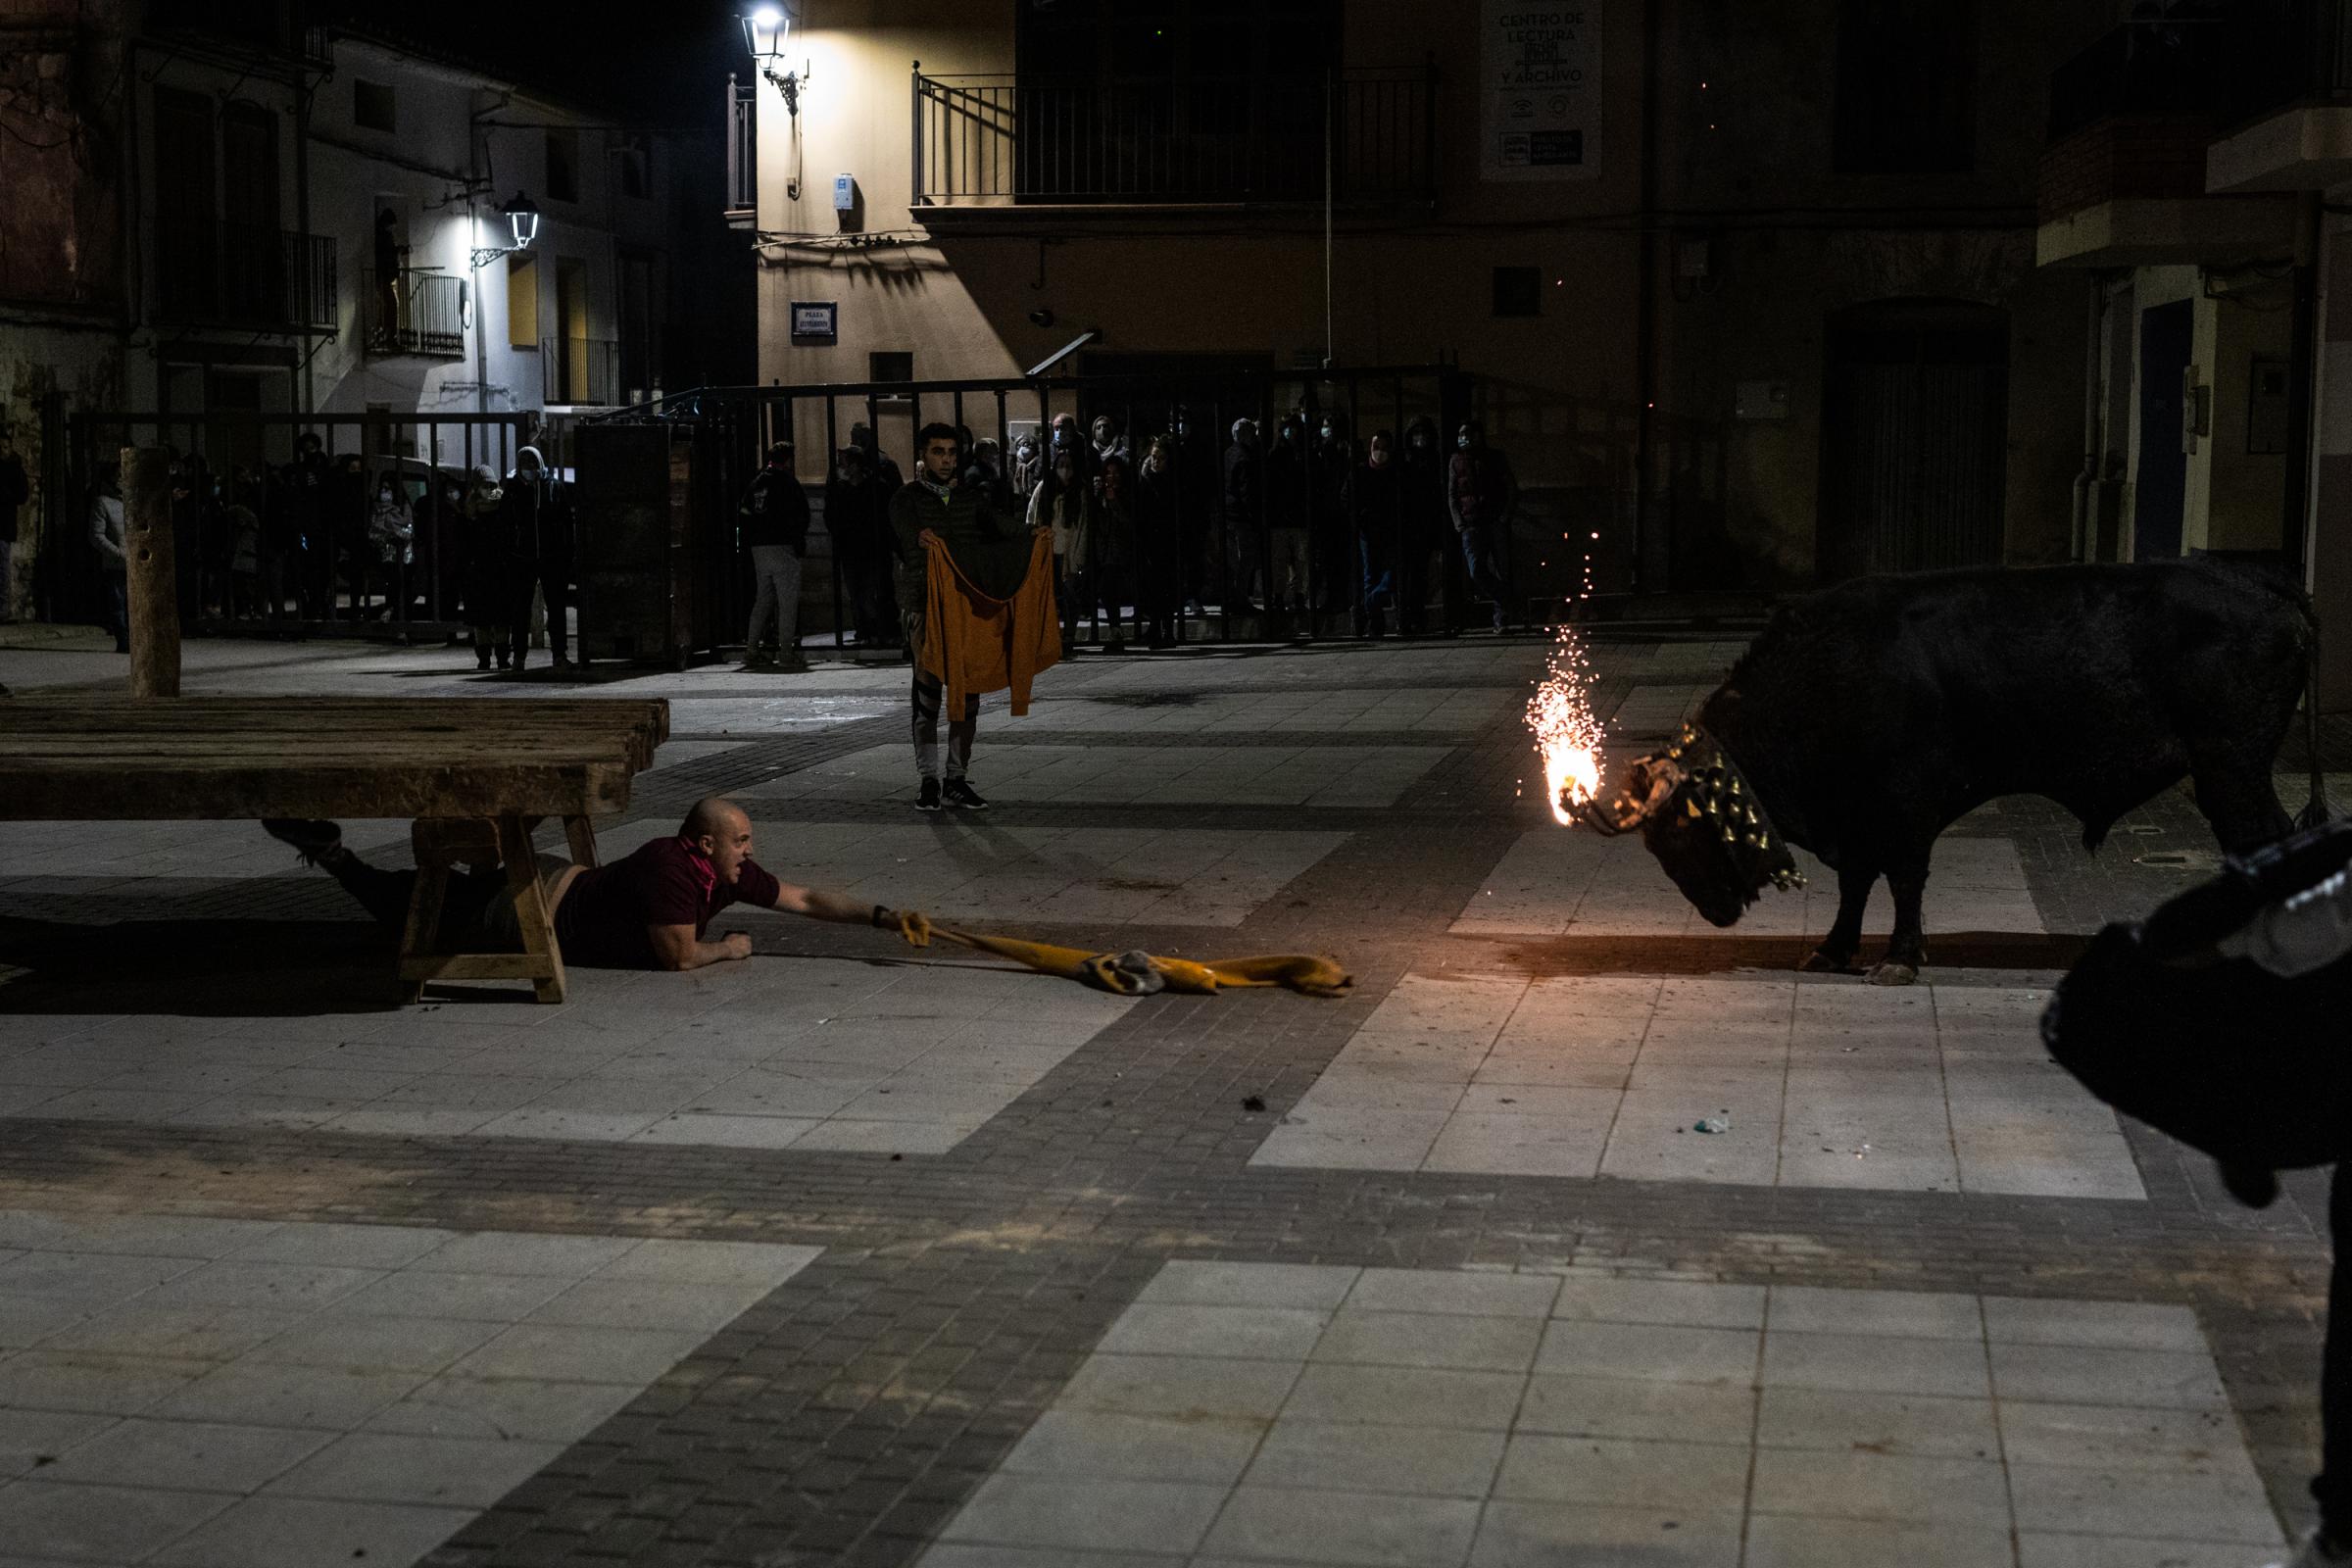 Spain's Dwindling Bullfighting Traditions - VALENCIA, SPAIN - DECEMBER 04: Young people have fun with...